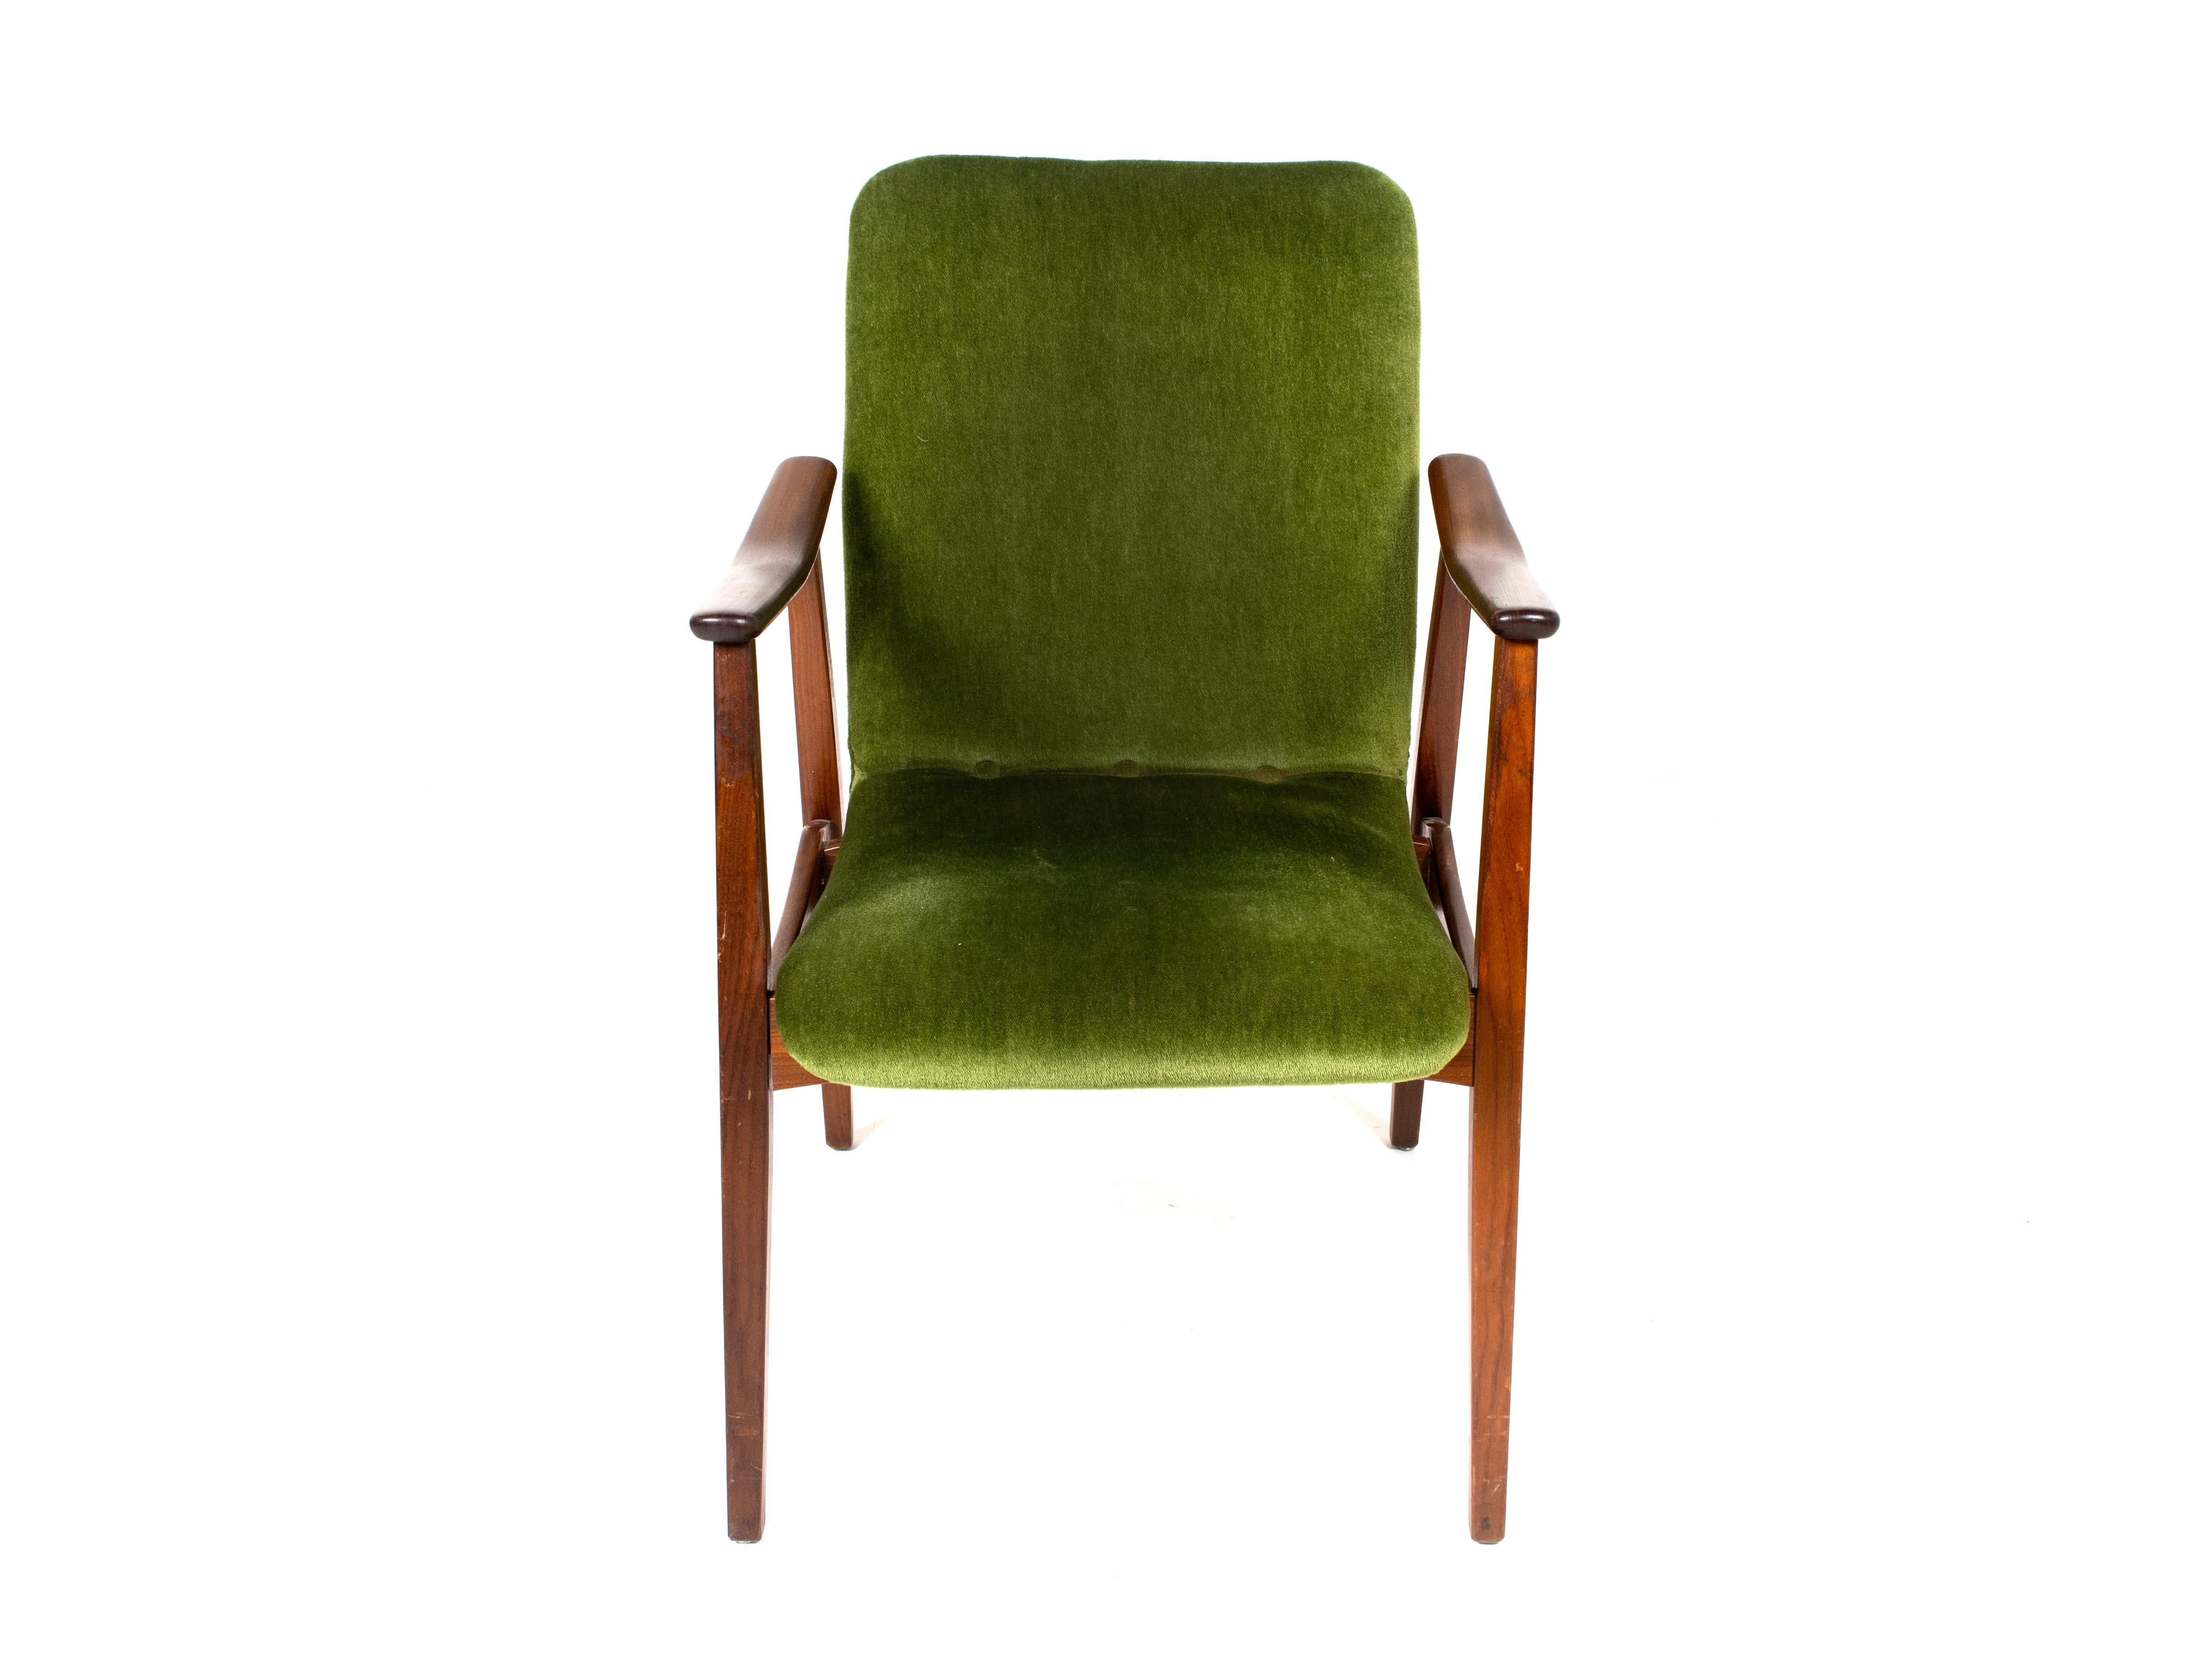 Amazing vintage lounge chair in teak and velvet green fabric. This chair has a design that is very similar to the design of Louis Van Teeffelen and Danish Design of the 1960s. The armrests have a curve and are elegantly shaped. The fabric is warm